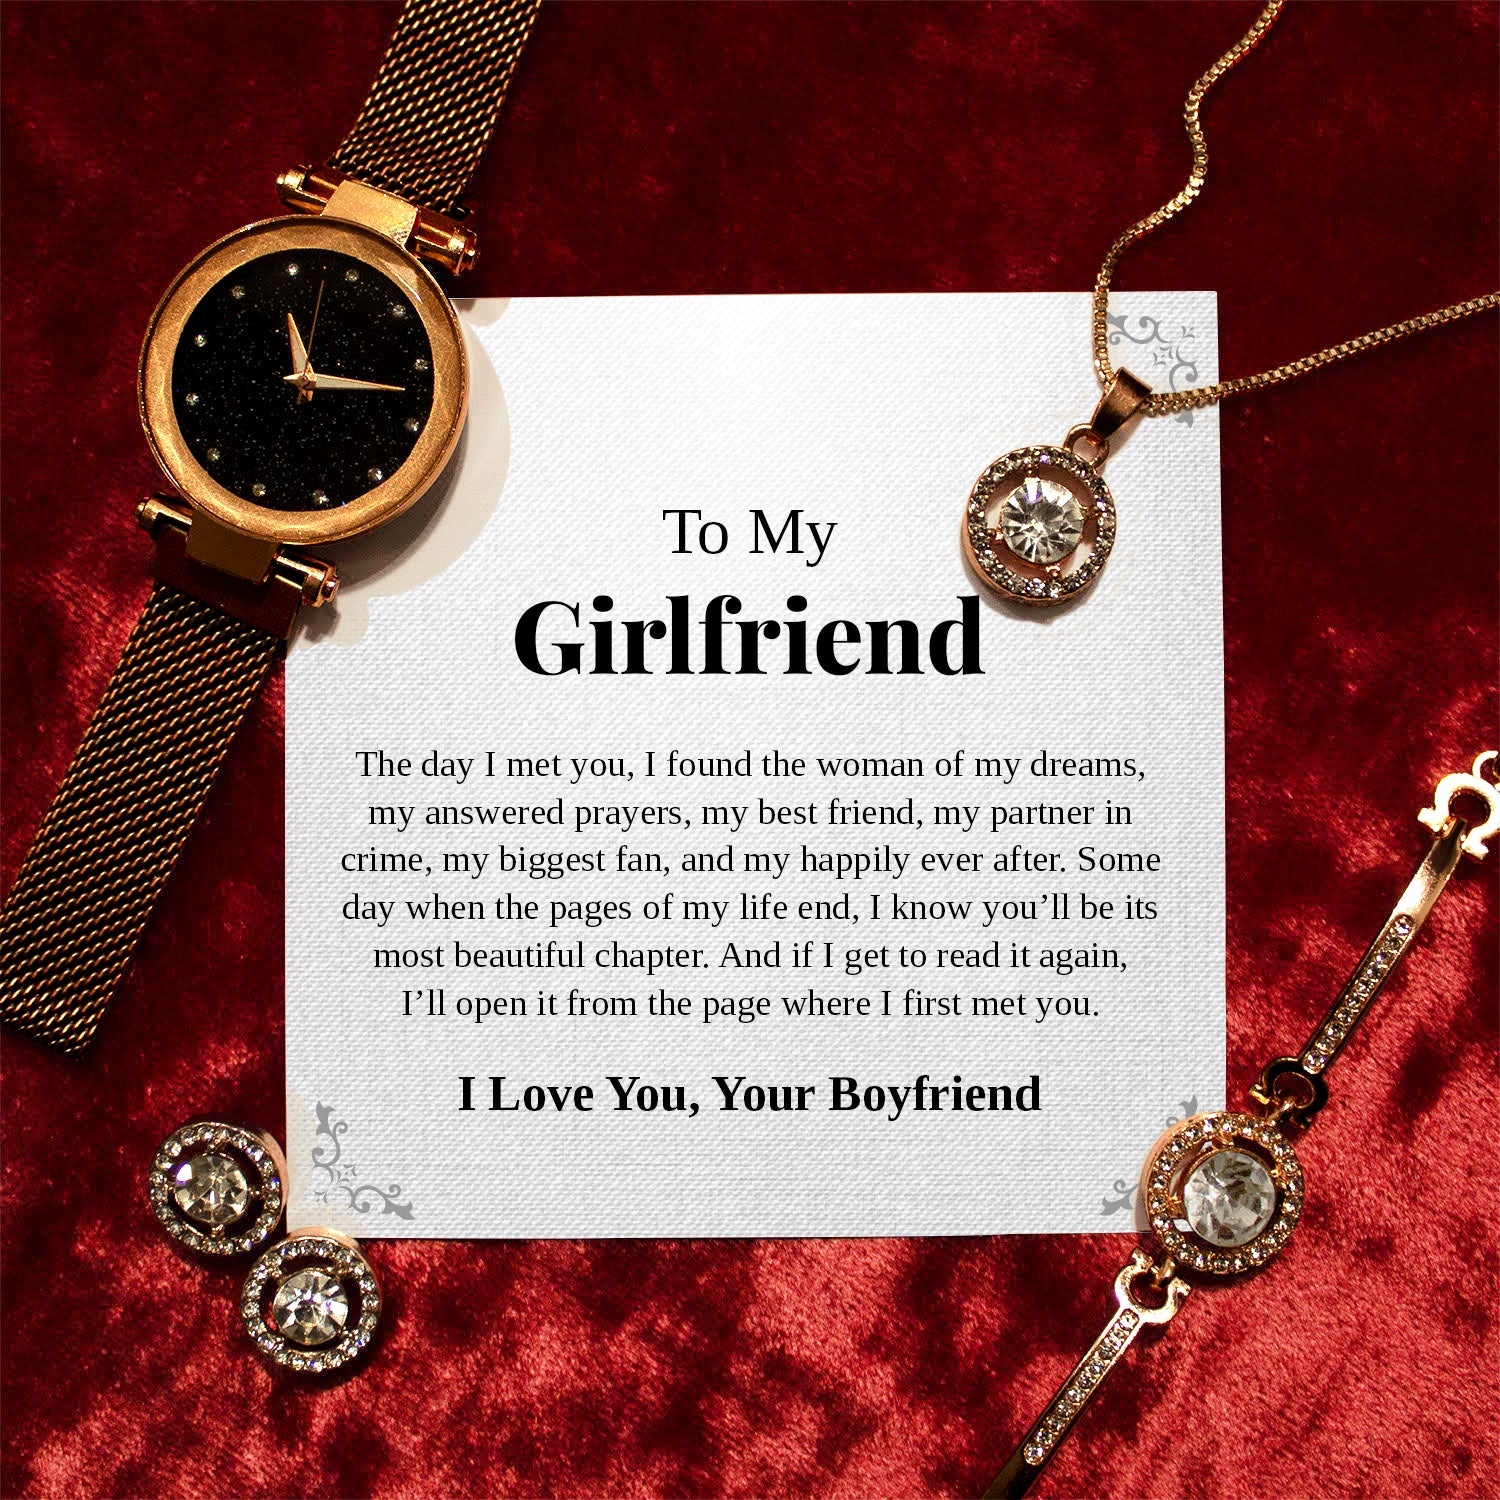 To My Girlfriend | “Pages of My Life” | Cosmopolitan Set